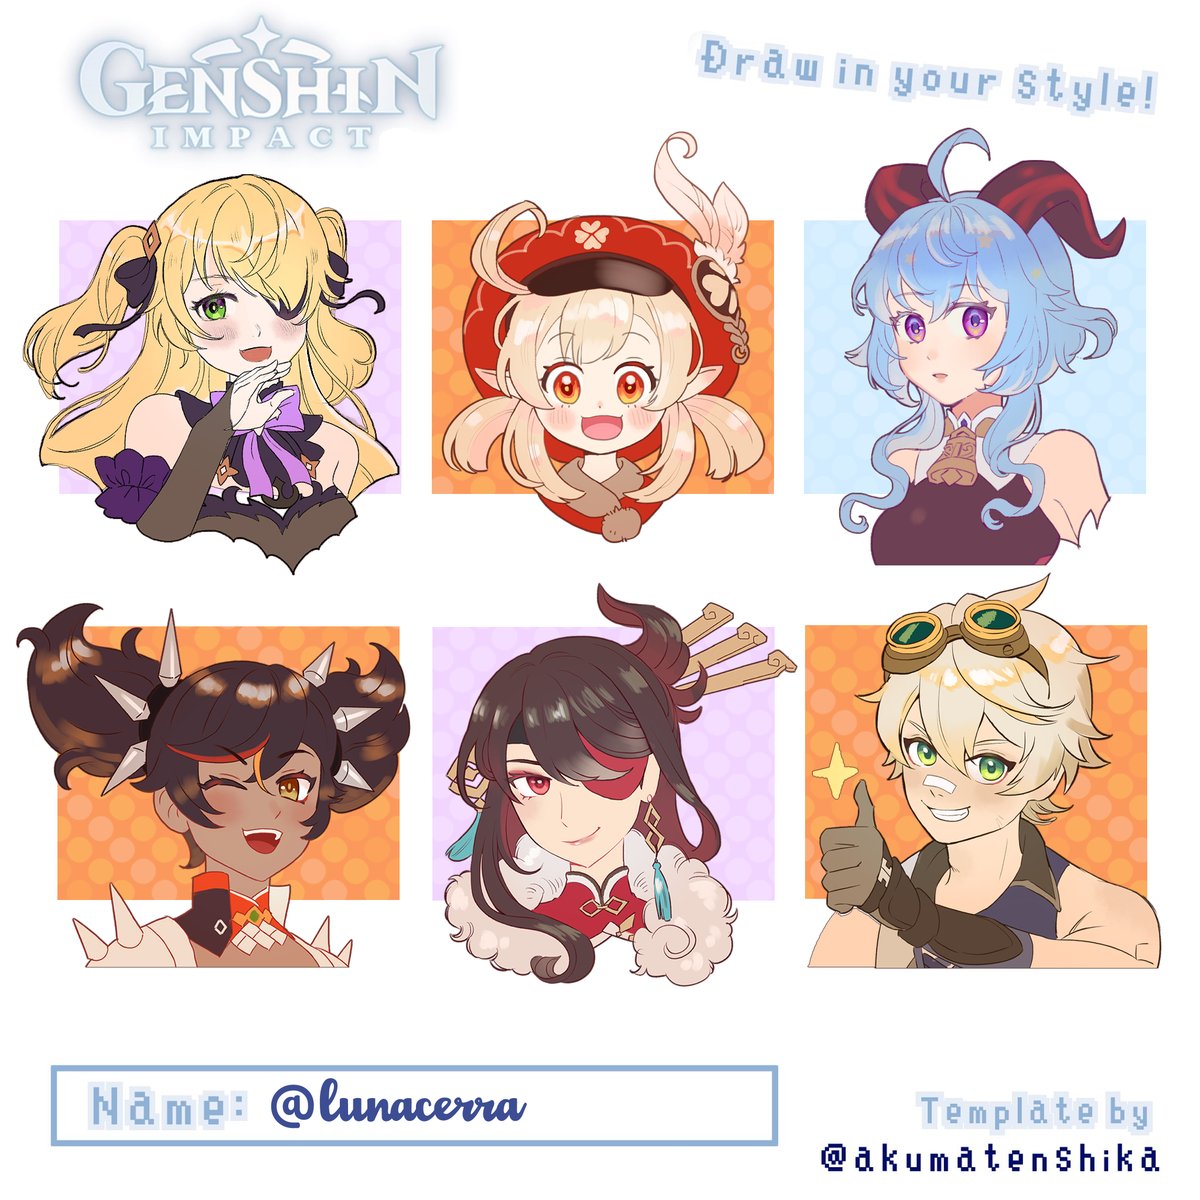 Cyn Shop Open Finished Genshin Impact Draw In Your Style Based On Your Suggestions Most Likely My Last Drawing In Genshinimpact Genshinimpactfanart T Co Vsnw1xxkrc